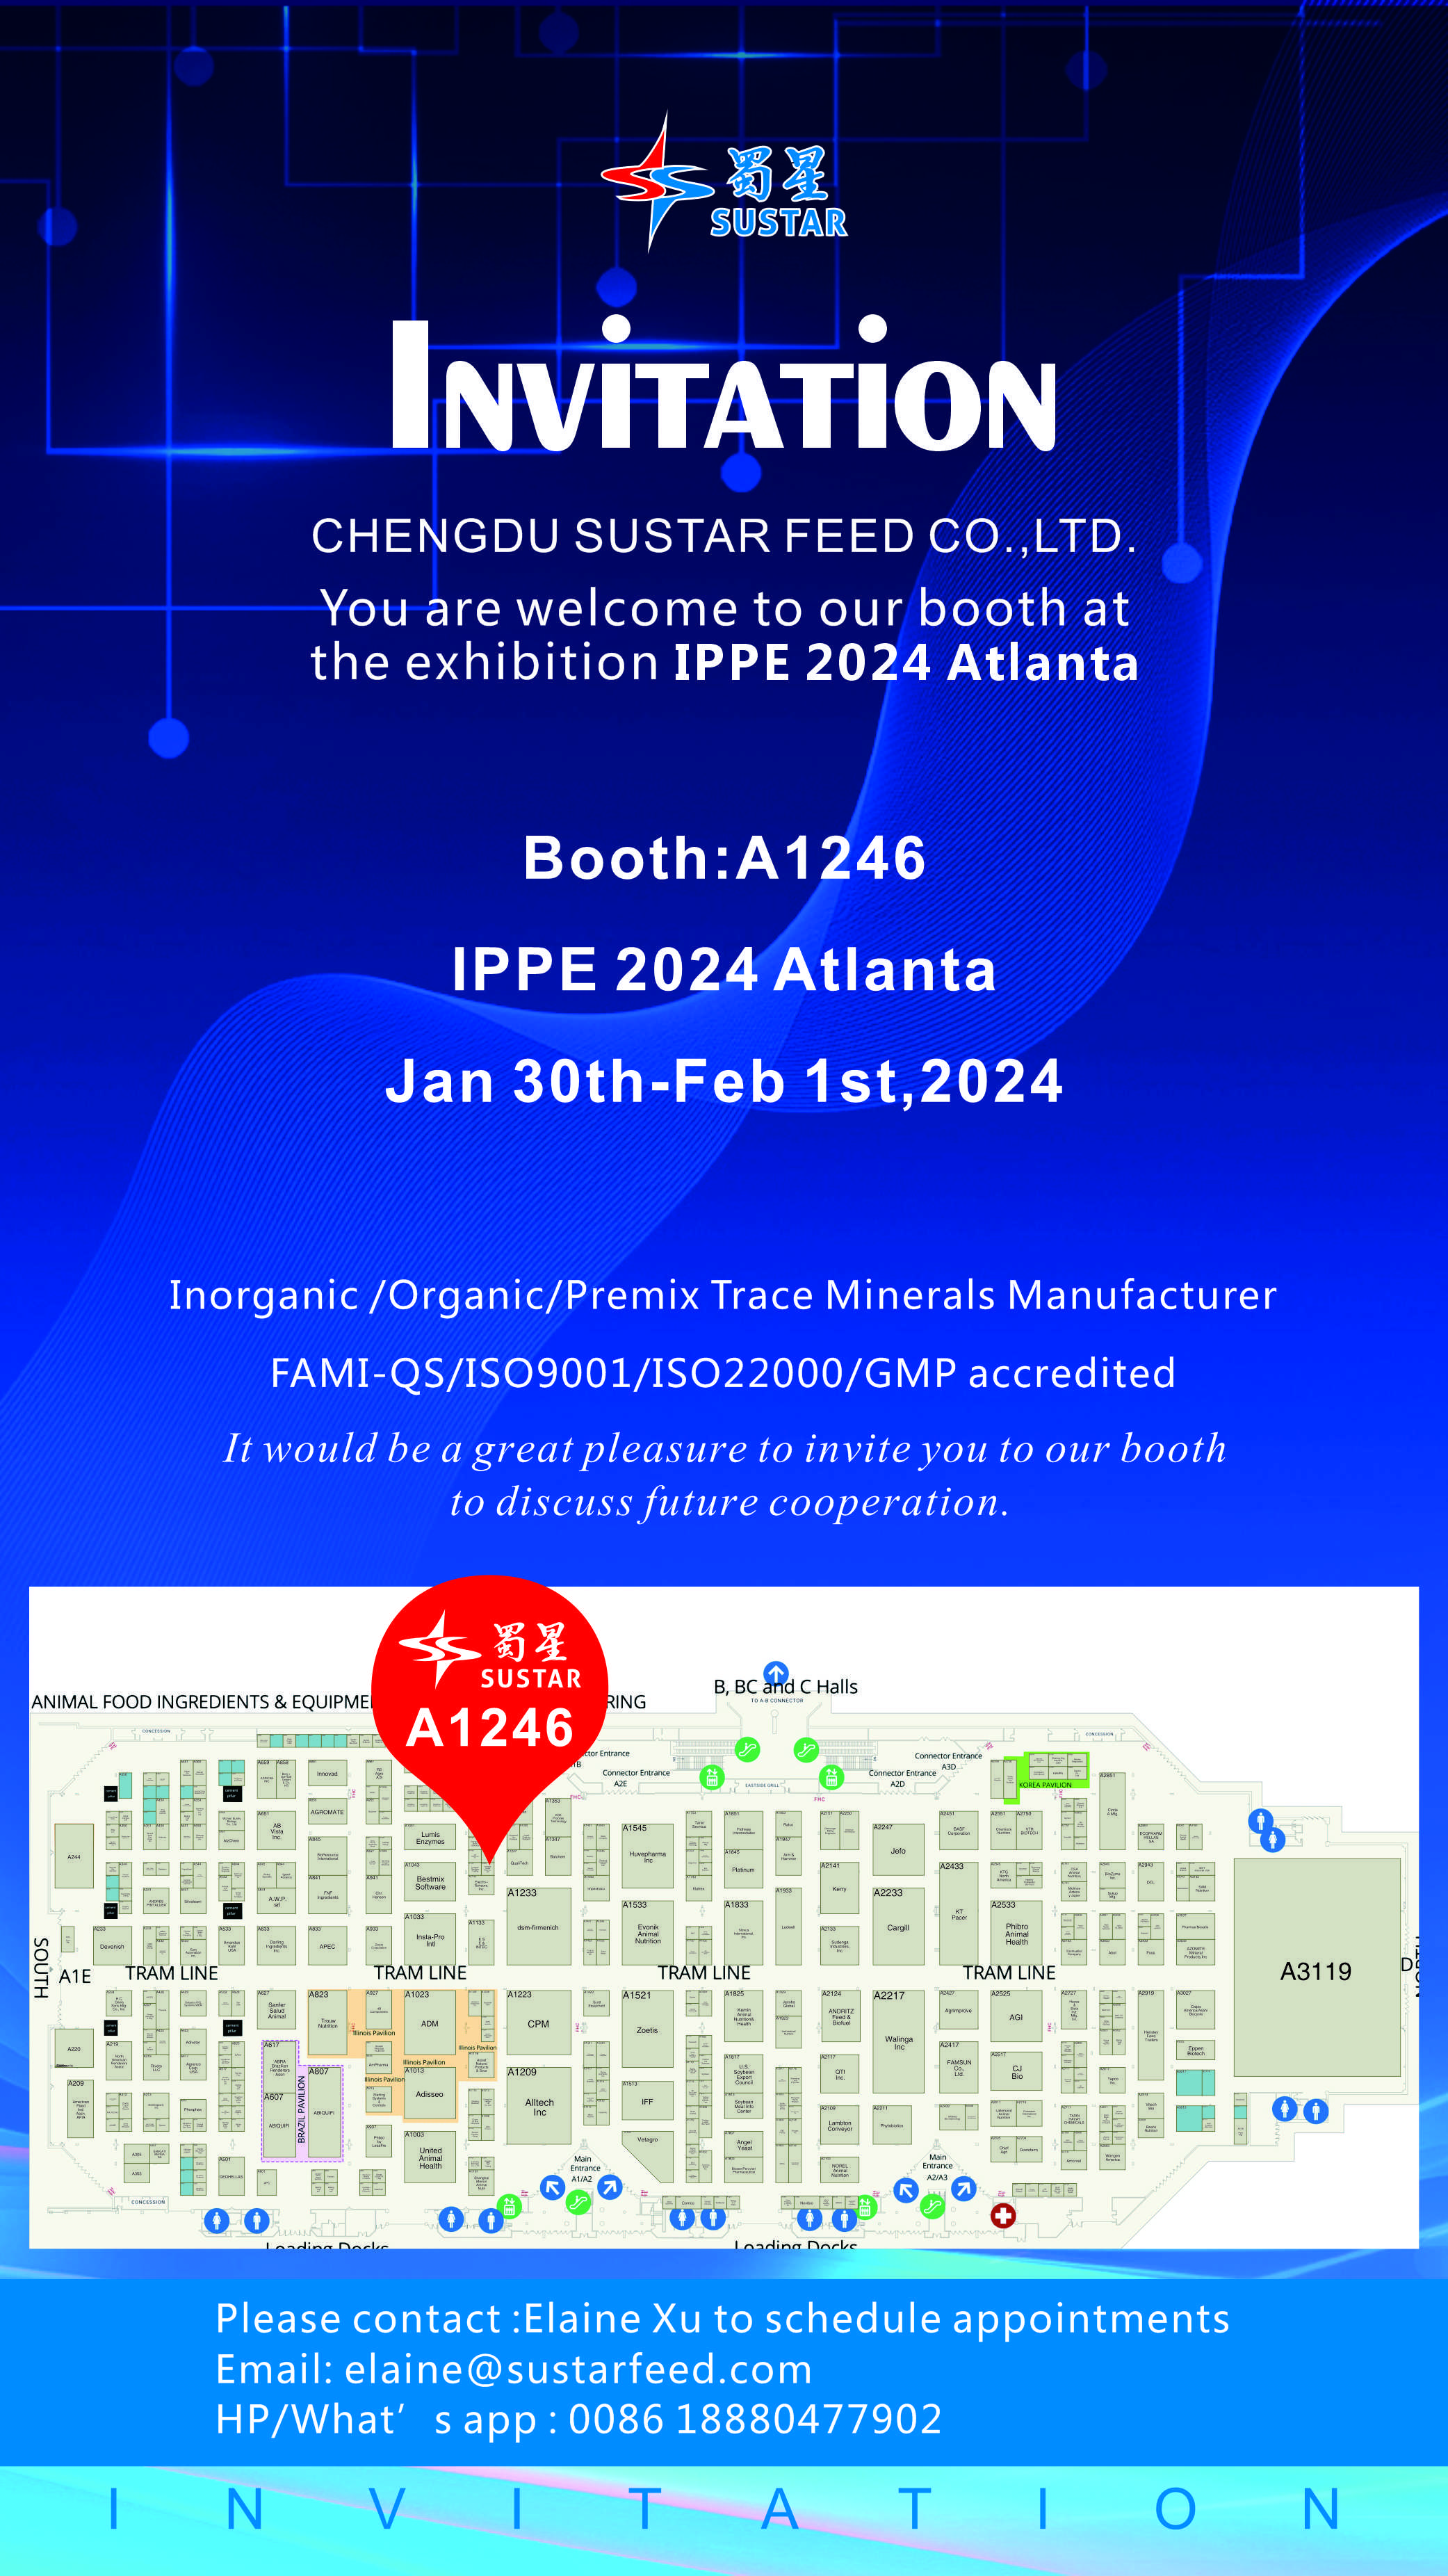 Welcome to our booth A1246 at IPPE 2024 Atlanta from Jan 30th-Feb 1st, 2024!